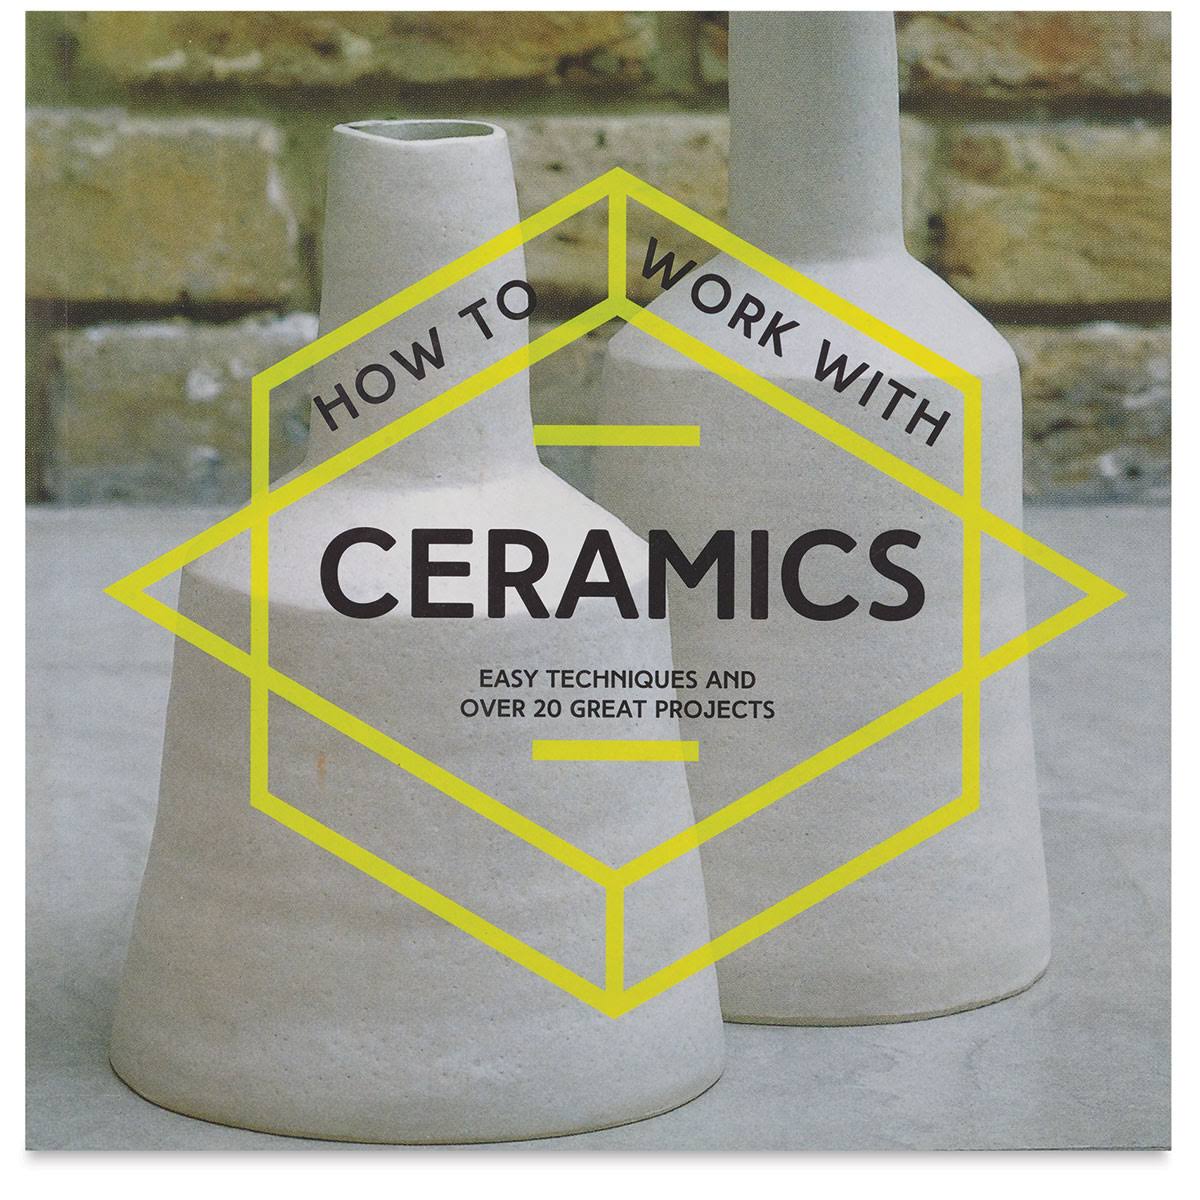 How to Work with Ceramics Easy Techniques and Over 20 Great Projects by Various